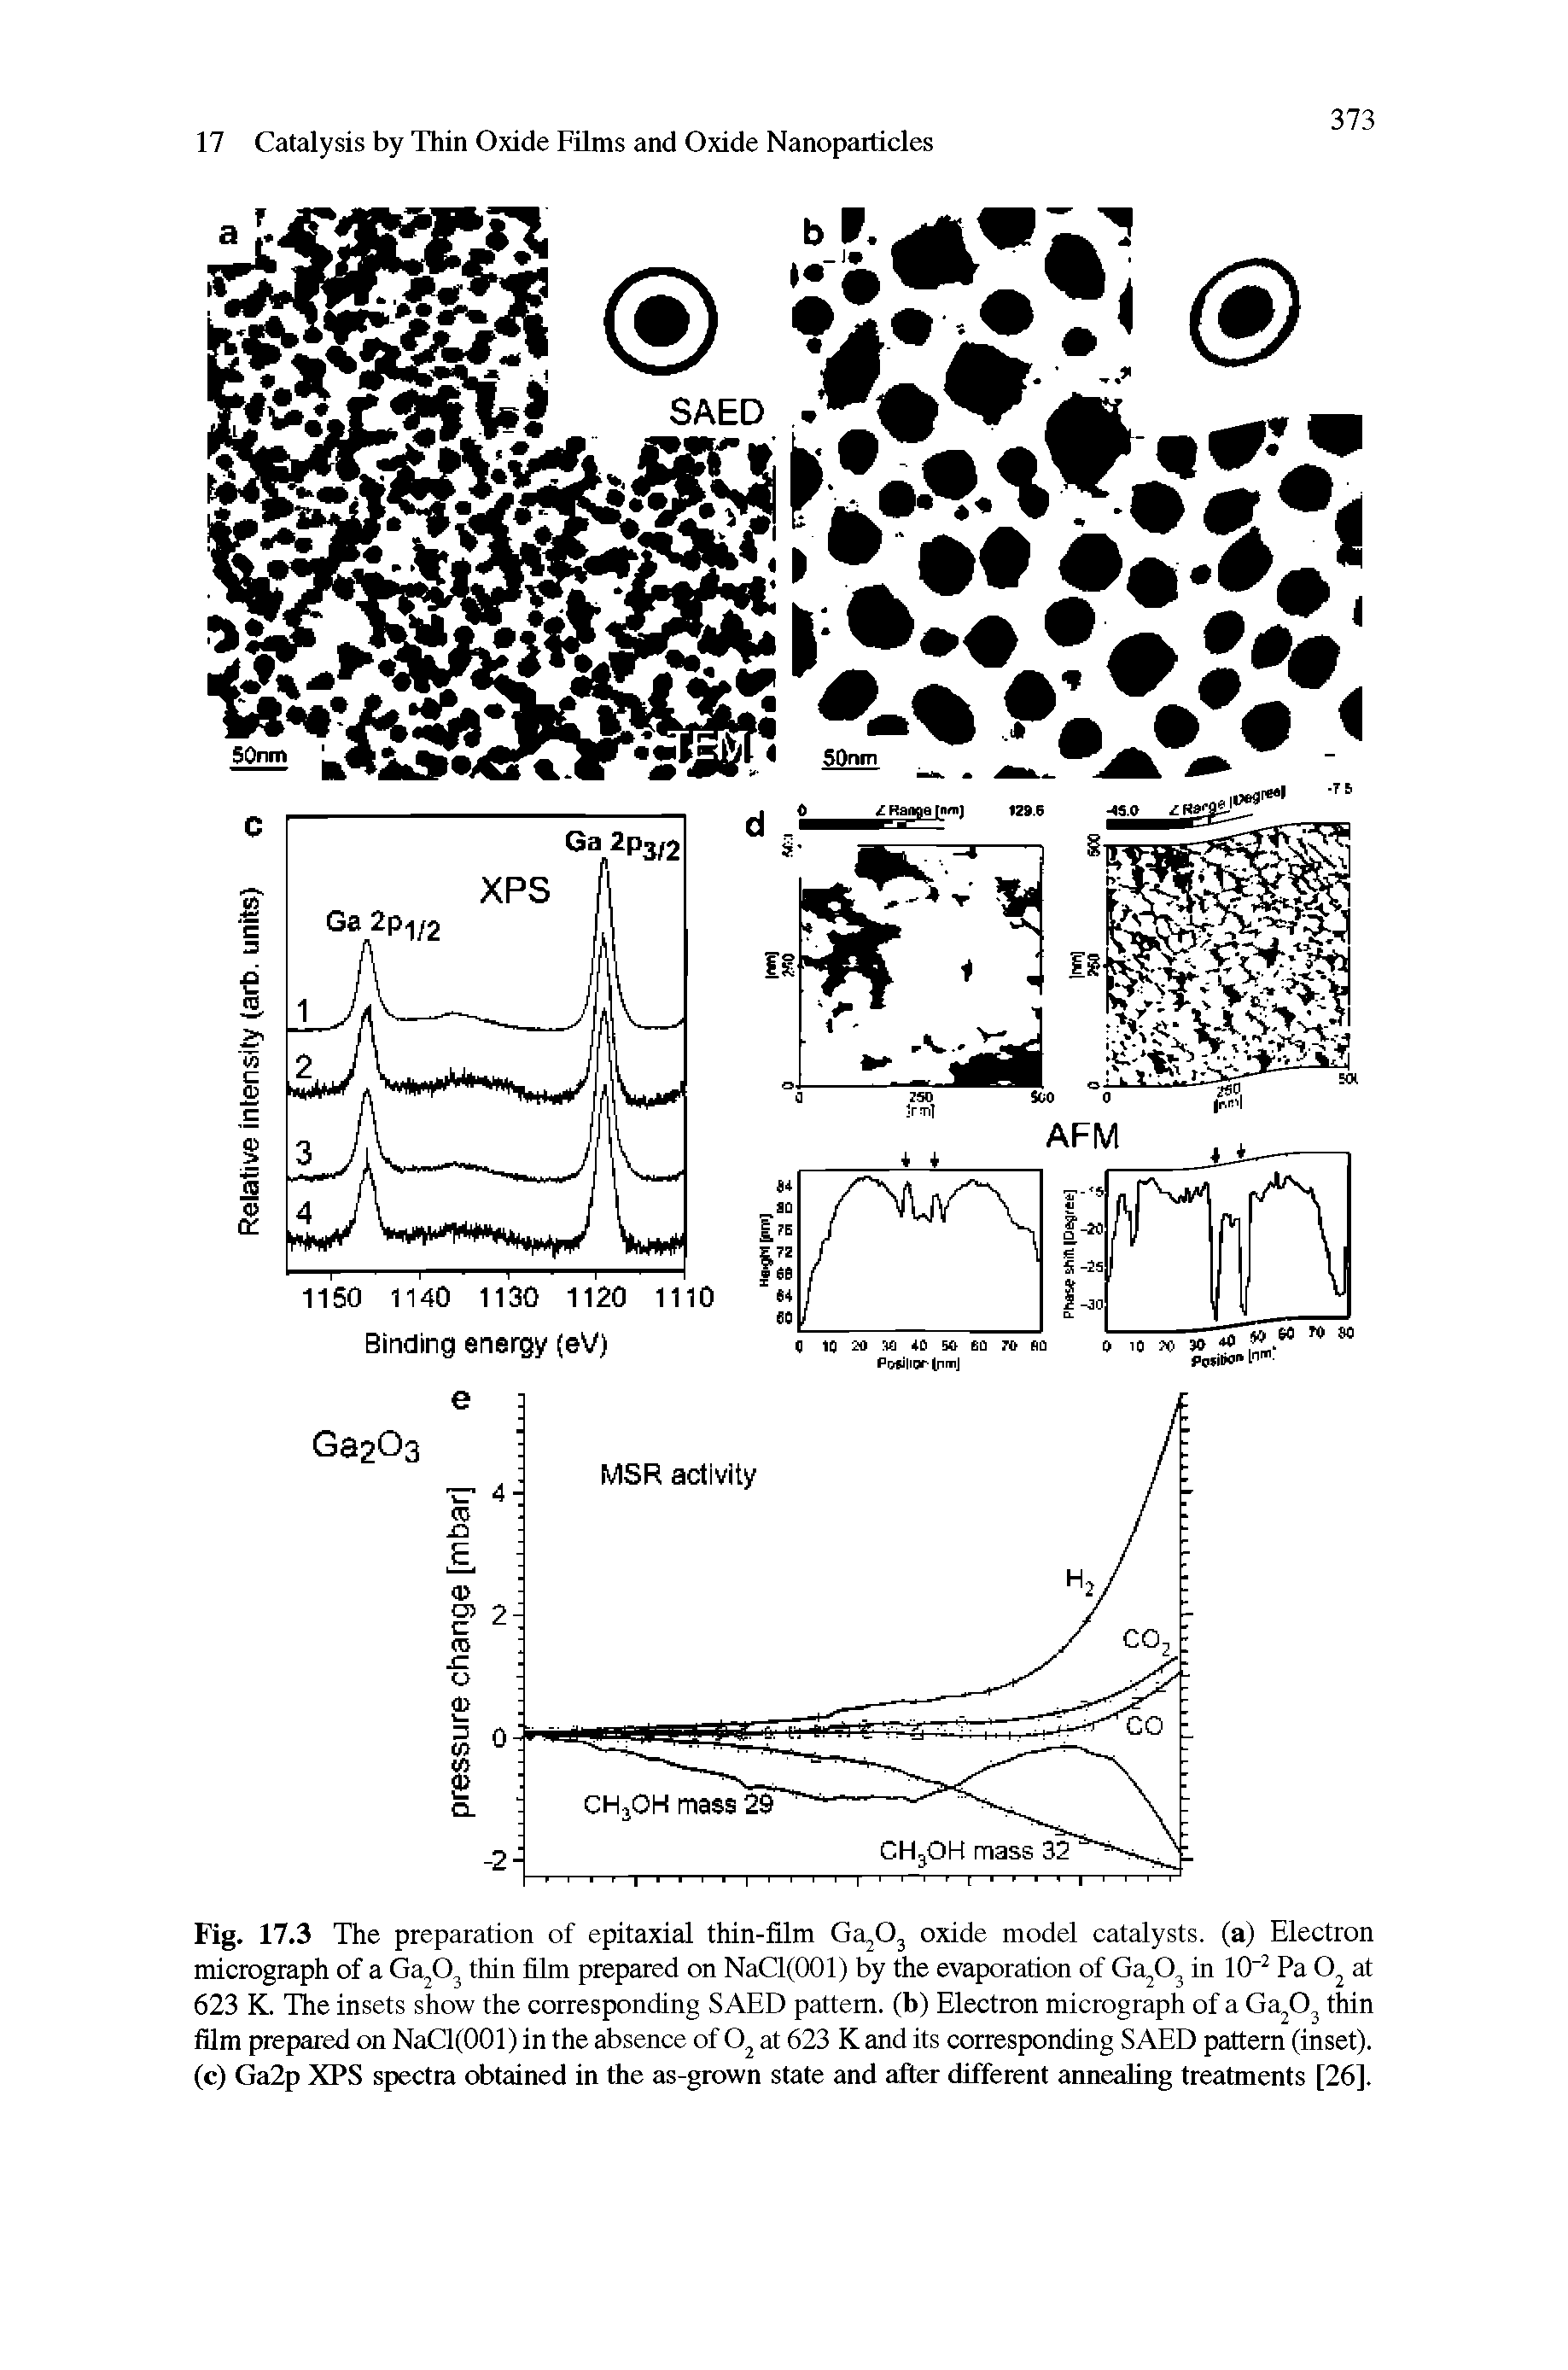 Fig. 17.3 The preparation of epitaxial thin-film Ga O, oxide model catalysts, (a) Electron micrograph of a Ga O thin film prepared on NaCl(OOl) by the evaporation of Ga O in 10 Pa O at 623 K. The insets show the corresponding SAED pattern, (b) Electron micrograph of a Ga O thin film prepared on NaCl(OOl) in the absence of at 623 K and its corresponding SAED pattern (inset), (c) Ga2p XPS spectra obtained in the as-grown state and after different annealing treatments [26].